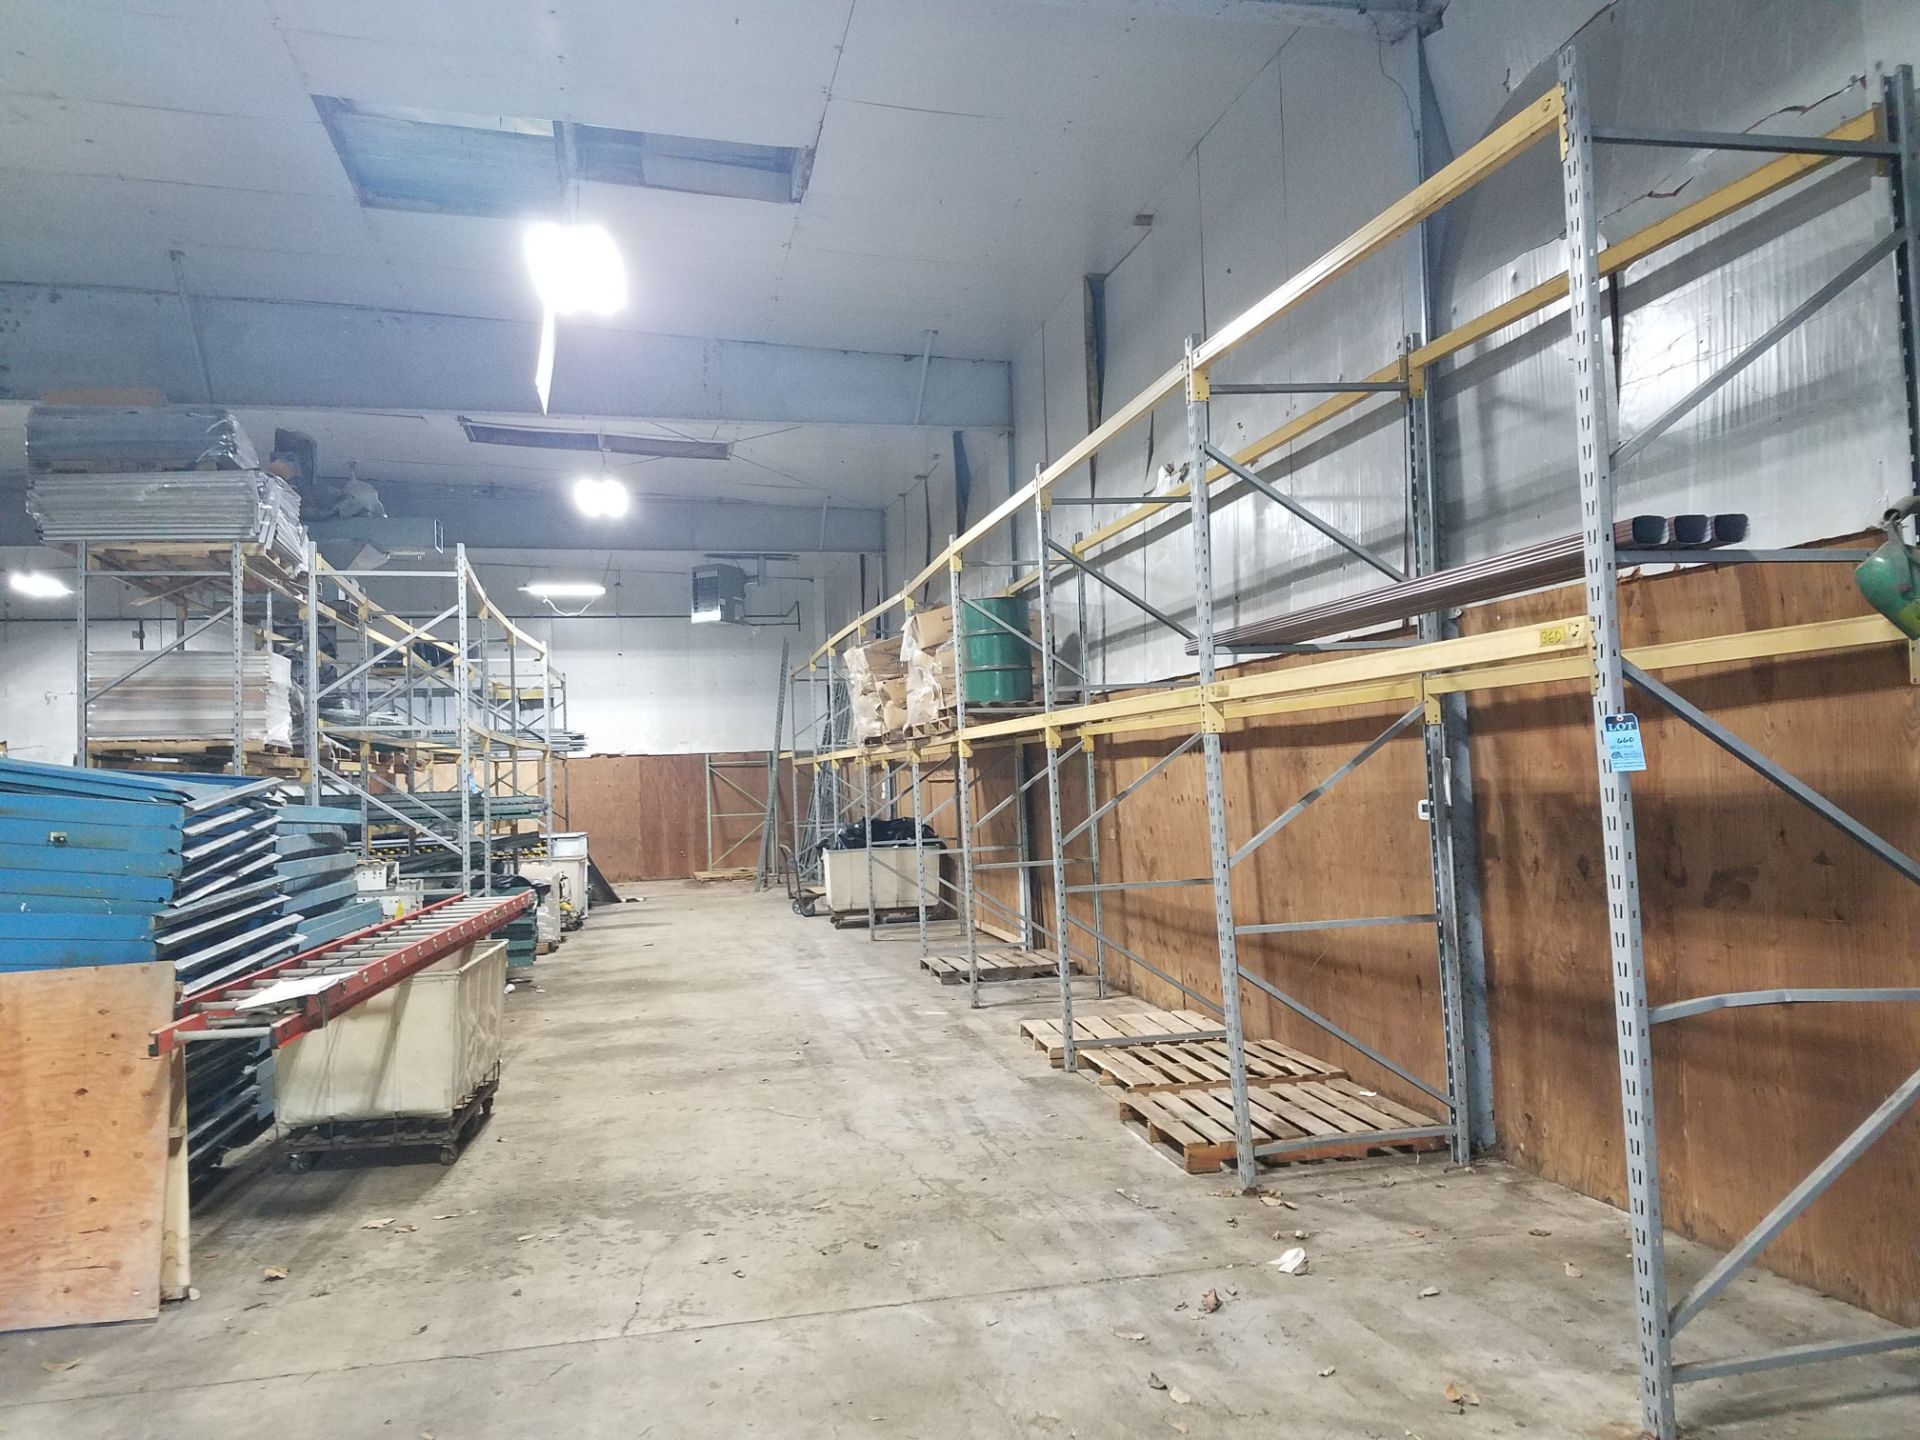 SECTIONS 96" X 42" X 144" ADJUSTABLE BEAM PALLET RACK W/ EXTRA UPRIGHTS; (26) 42" X 144"